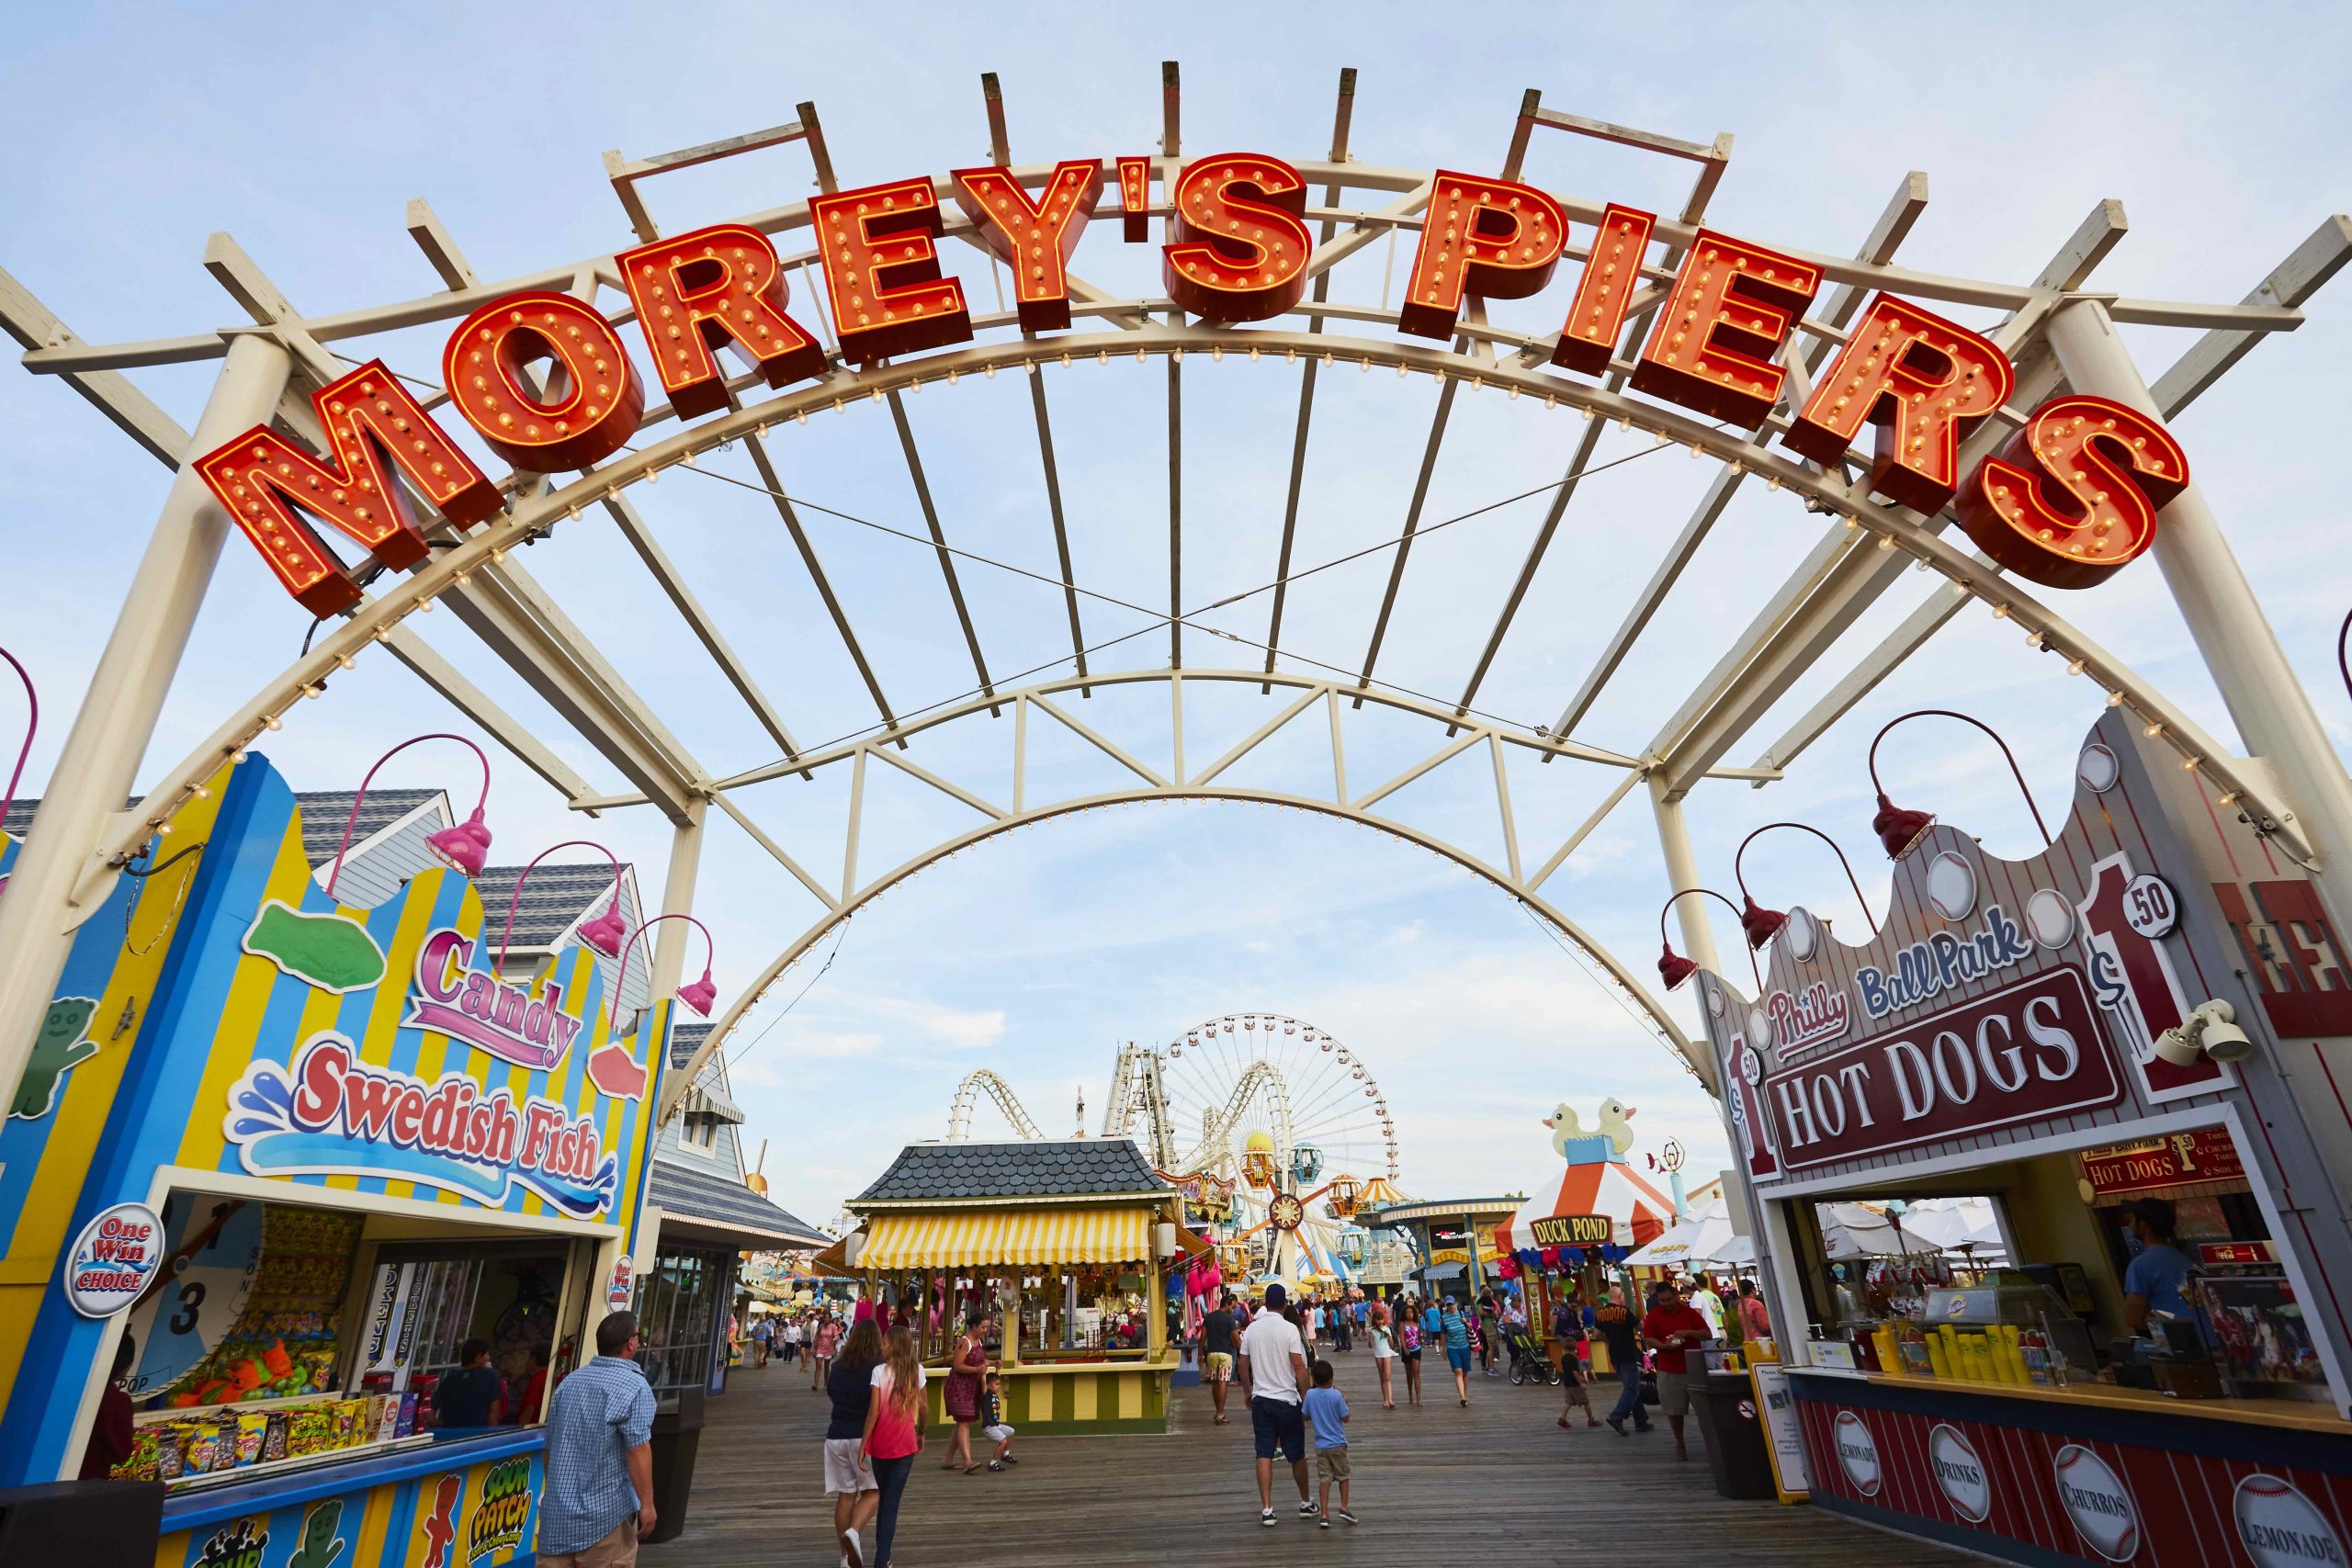 What's the Difference Between the Morey's Piers Piers?